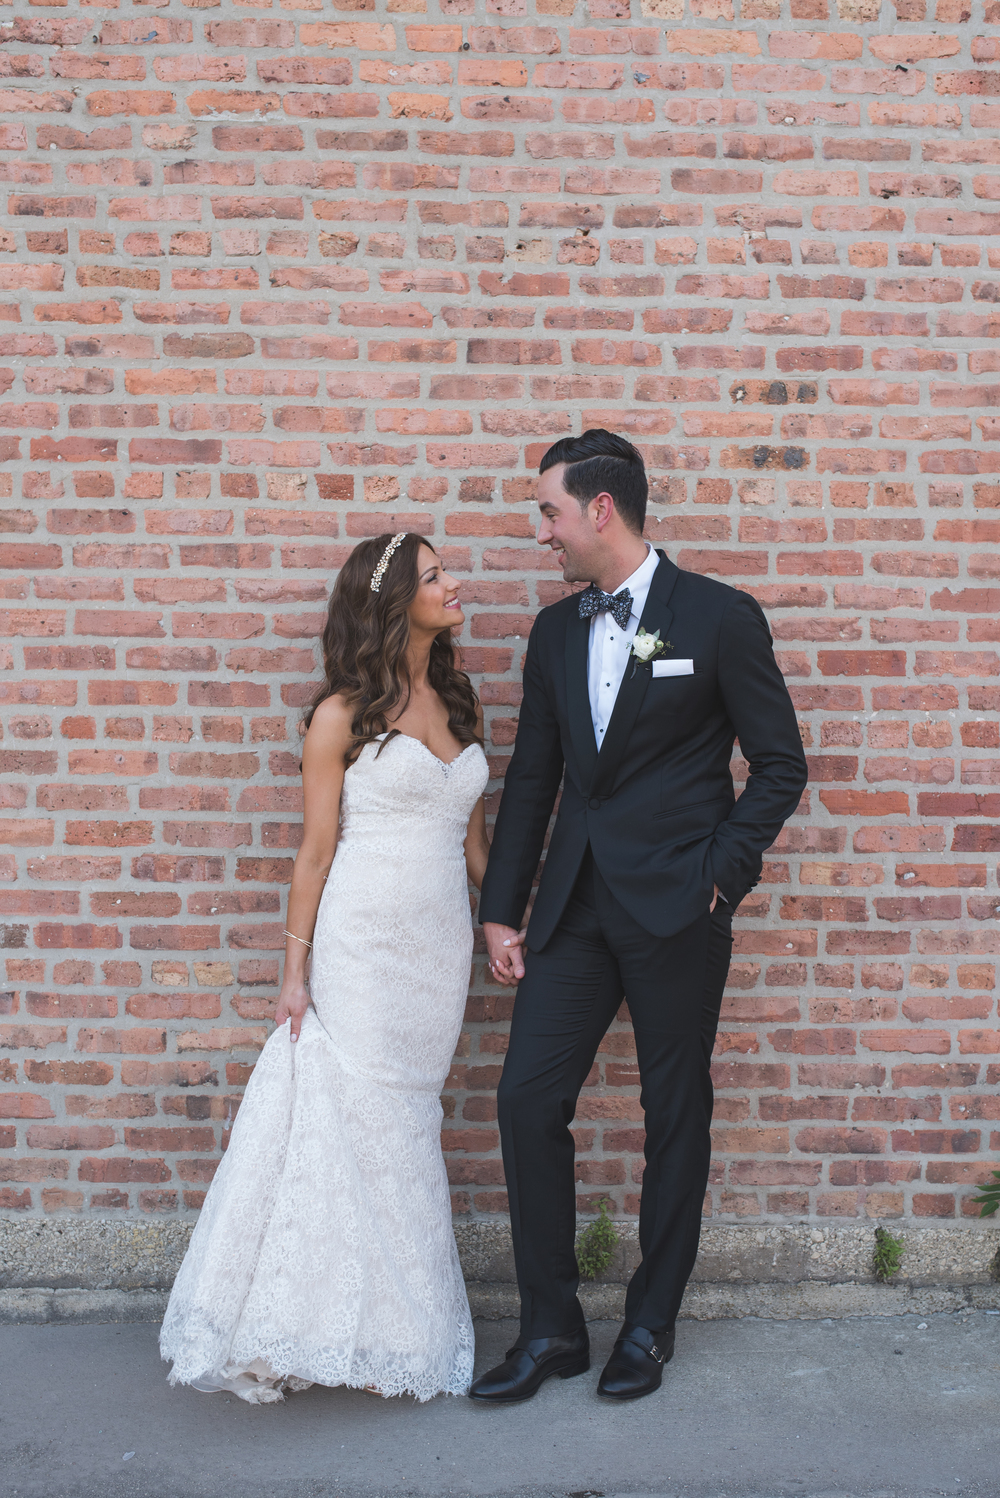 Venue:  Loft on Lake  | Photography:  Thara Photo  | Planning:  Elisa , The Simply Elegant Group | Draping:  Art of Imagination  | Floral:    Gratitude Heart Garden  | Catering:  FireFly  | Cake:  West Town Bakery  | Bar:  Binny's  | Reception:  Toast & Jam Transportation:  Windy City Limo